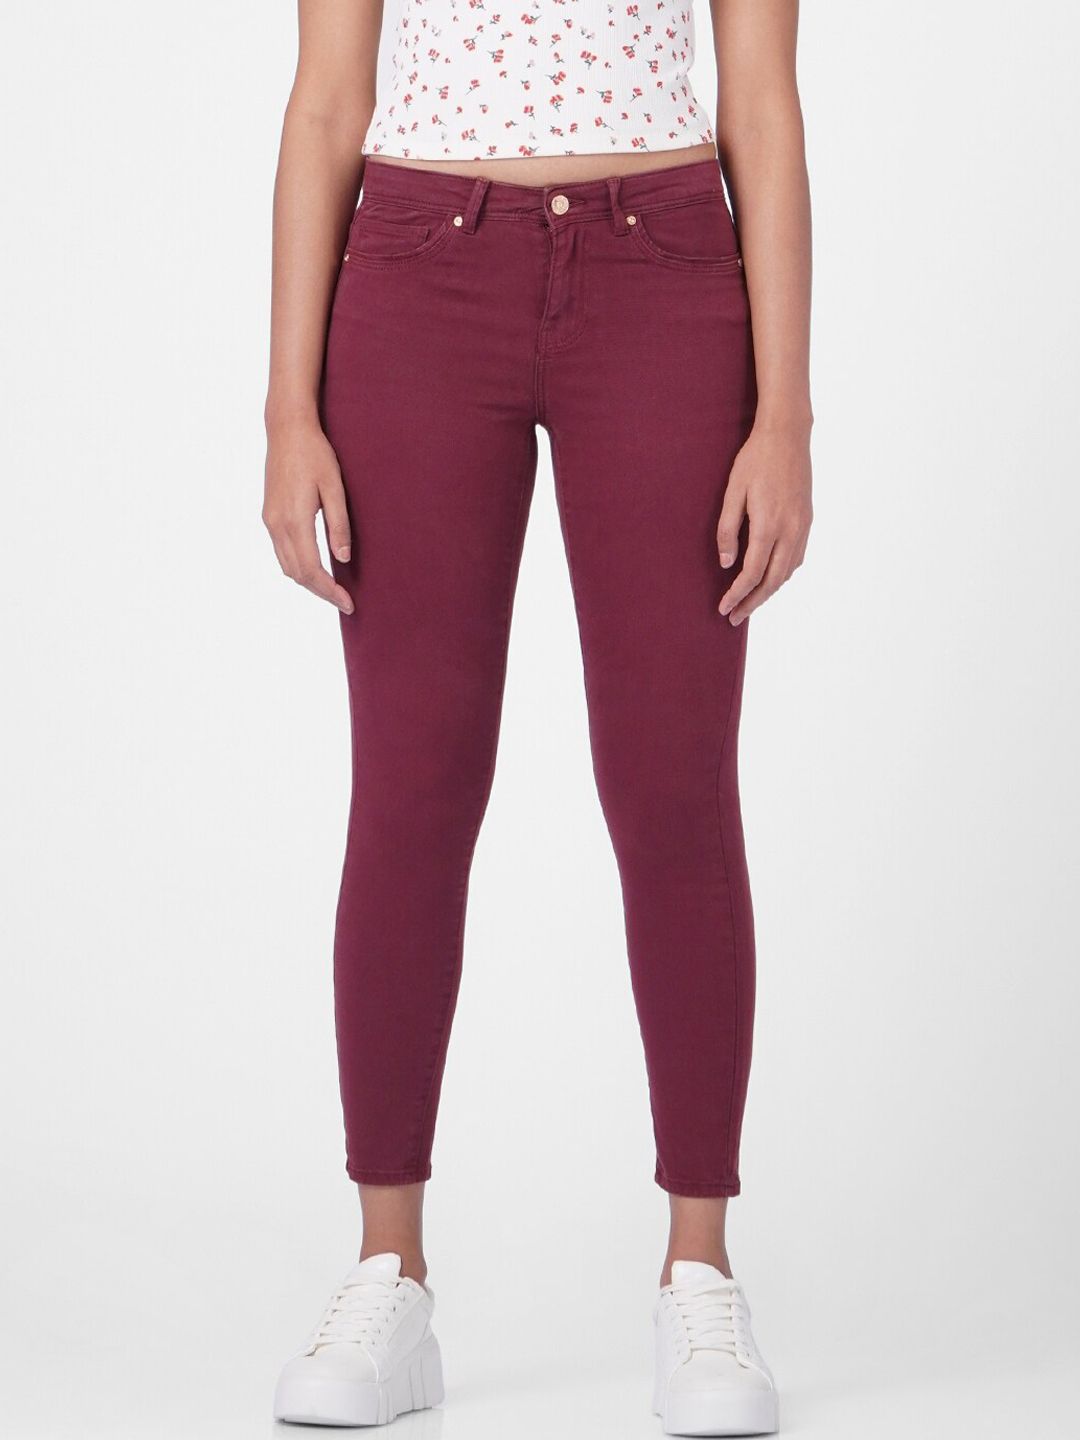 ONLY Women Maroon Slim Fit Jeans Price in India